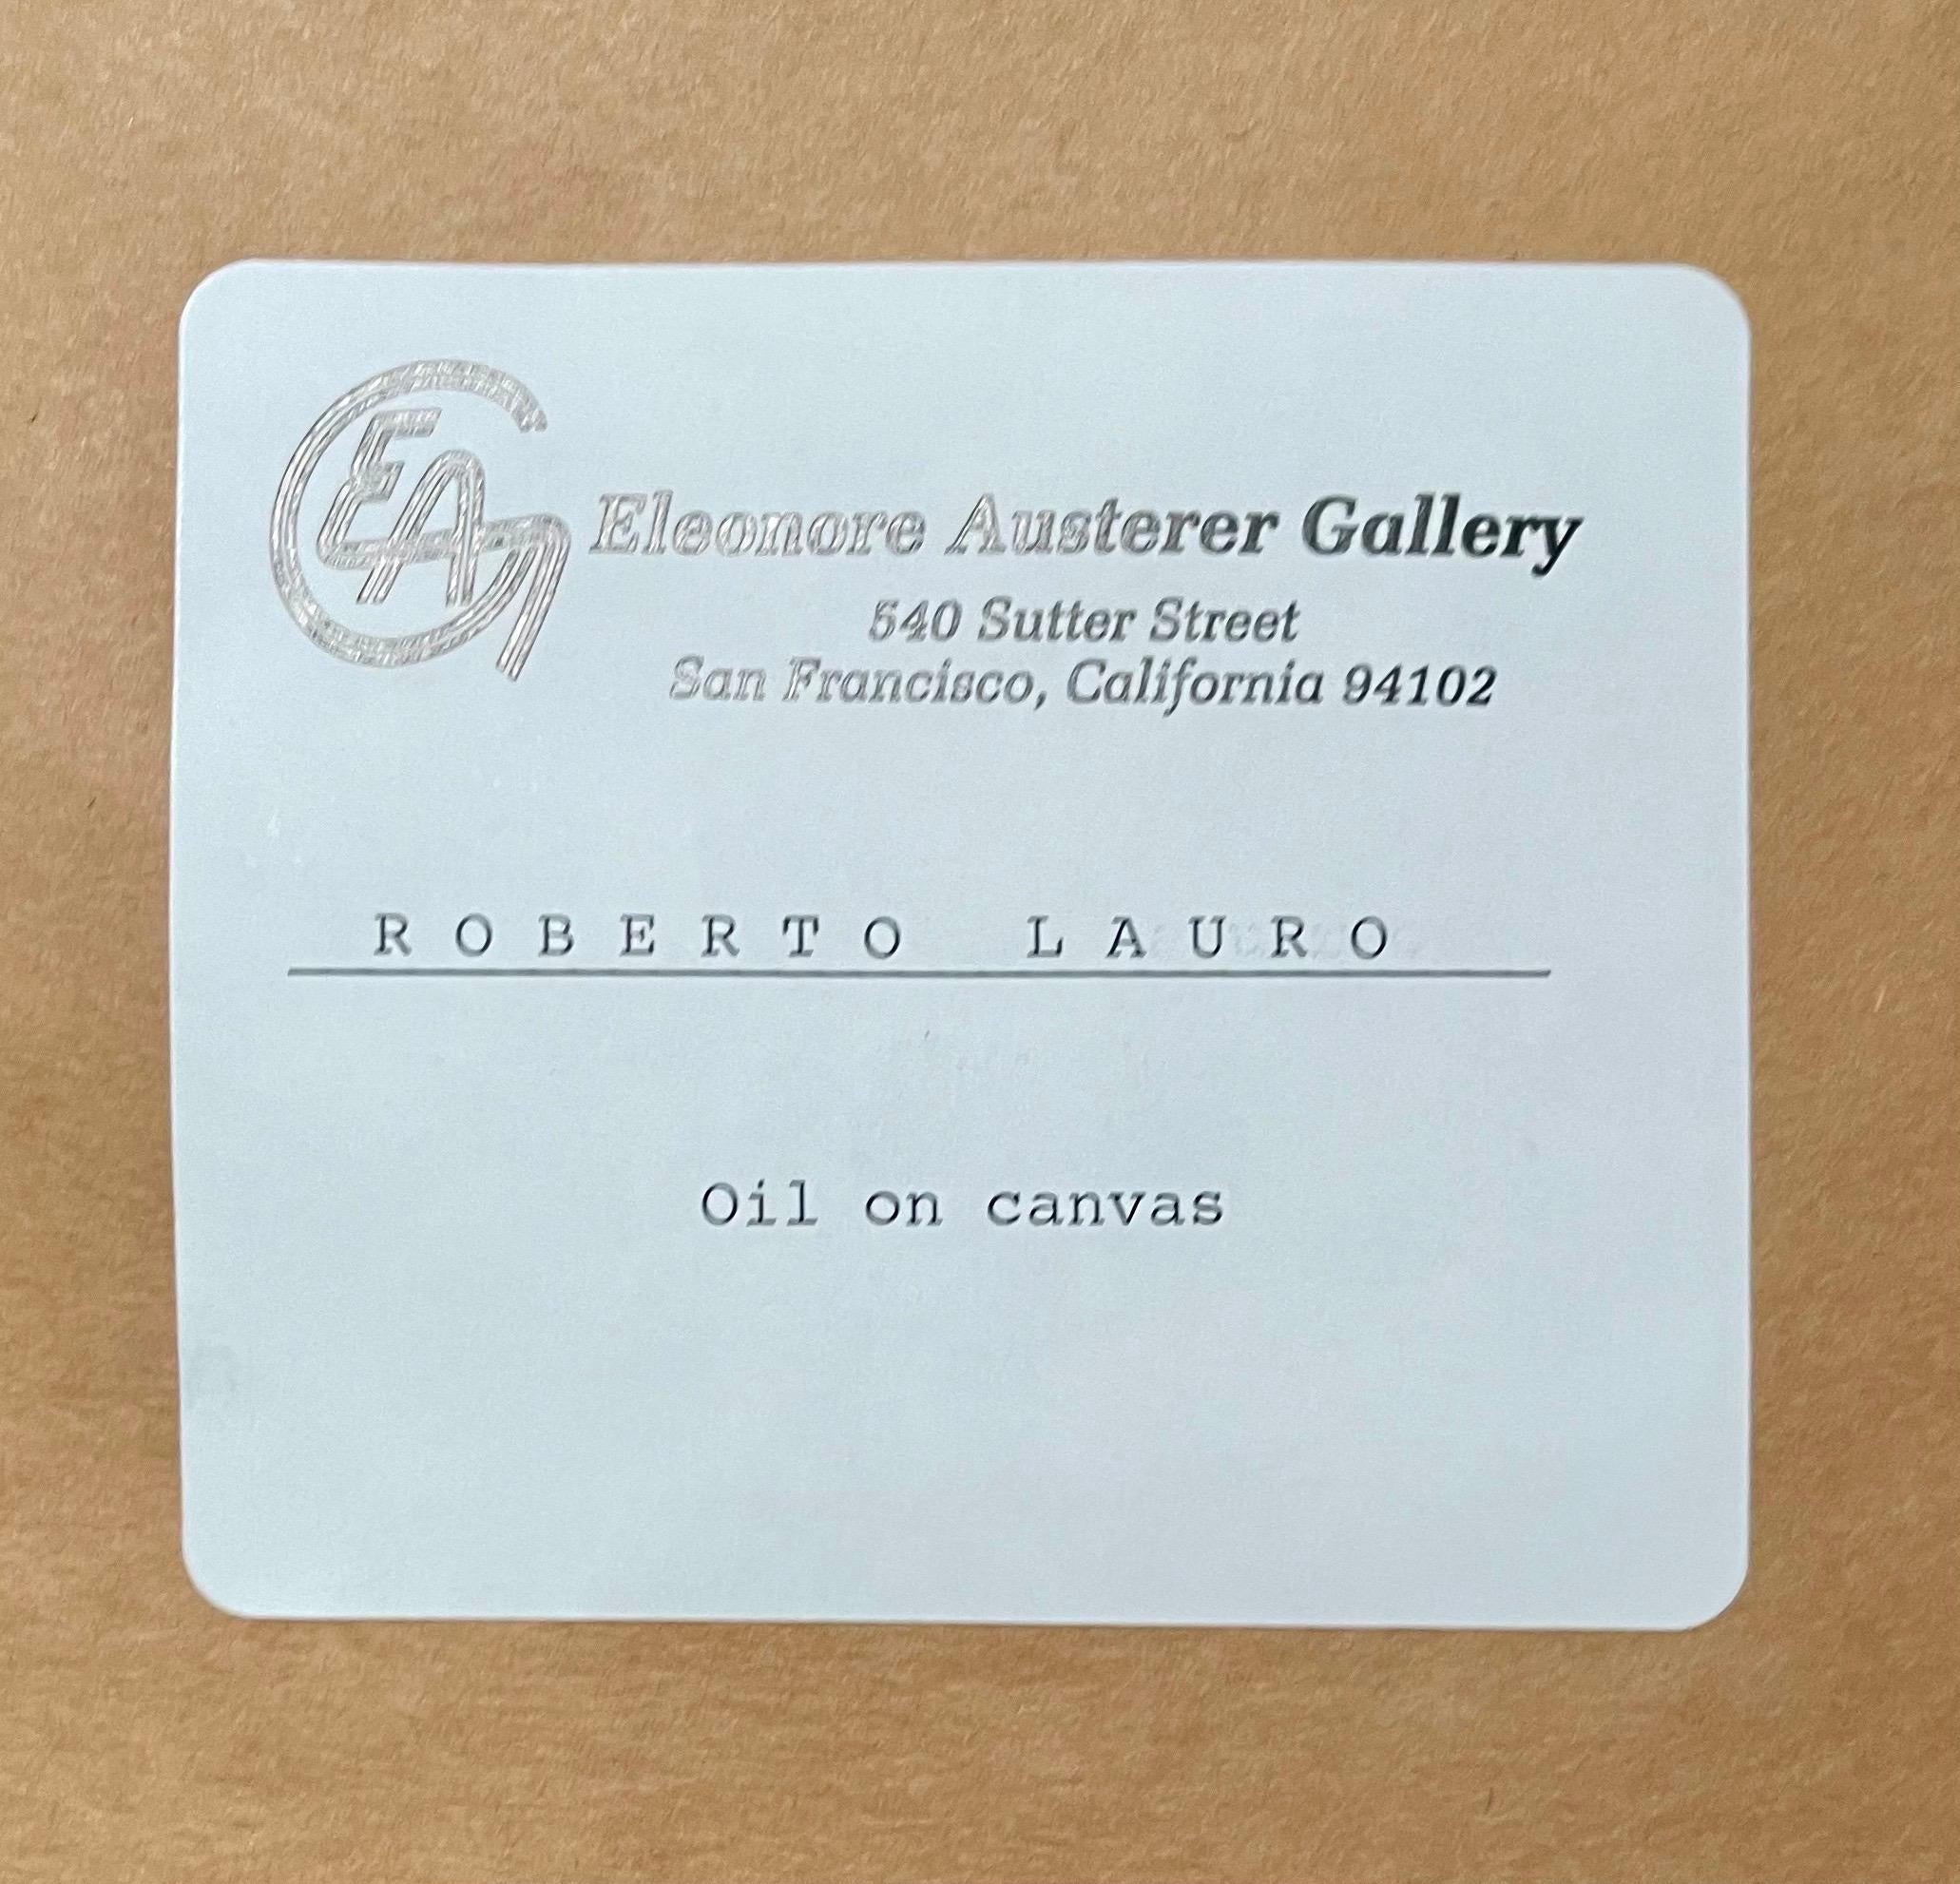 Oil Painting on canvas
Hand signed to lower right Lauro. 
Provenance: Eleonore Austerer Gallery, San Francisco, CA
Work Size: 39.5 x 39.5 in. framed 44 X 44 inches.


Roberto Lauro is a British-Swiss Post War & Contemporary artist who was born in